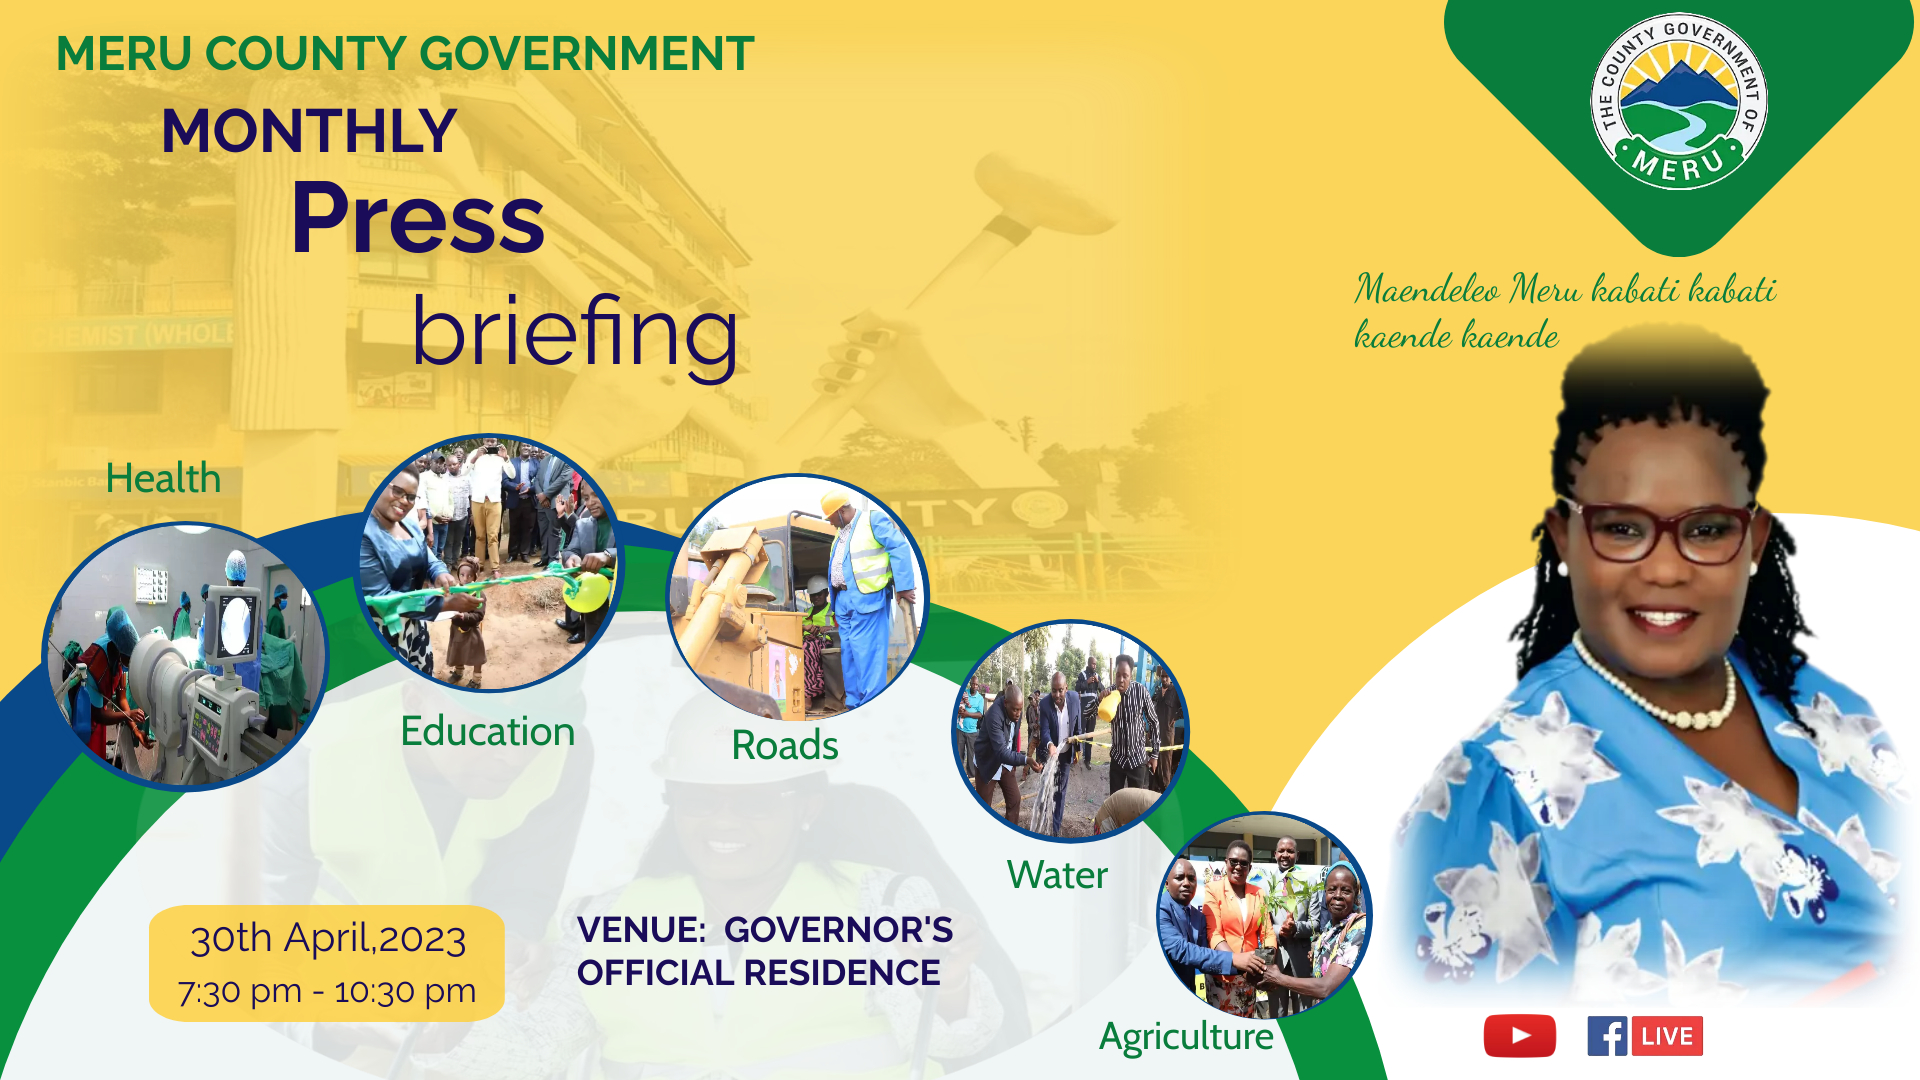 MERU COUNTY GOVERNMENT MONTHLY PRESS BRIEFING - County Government of Meru